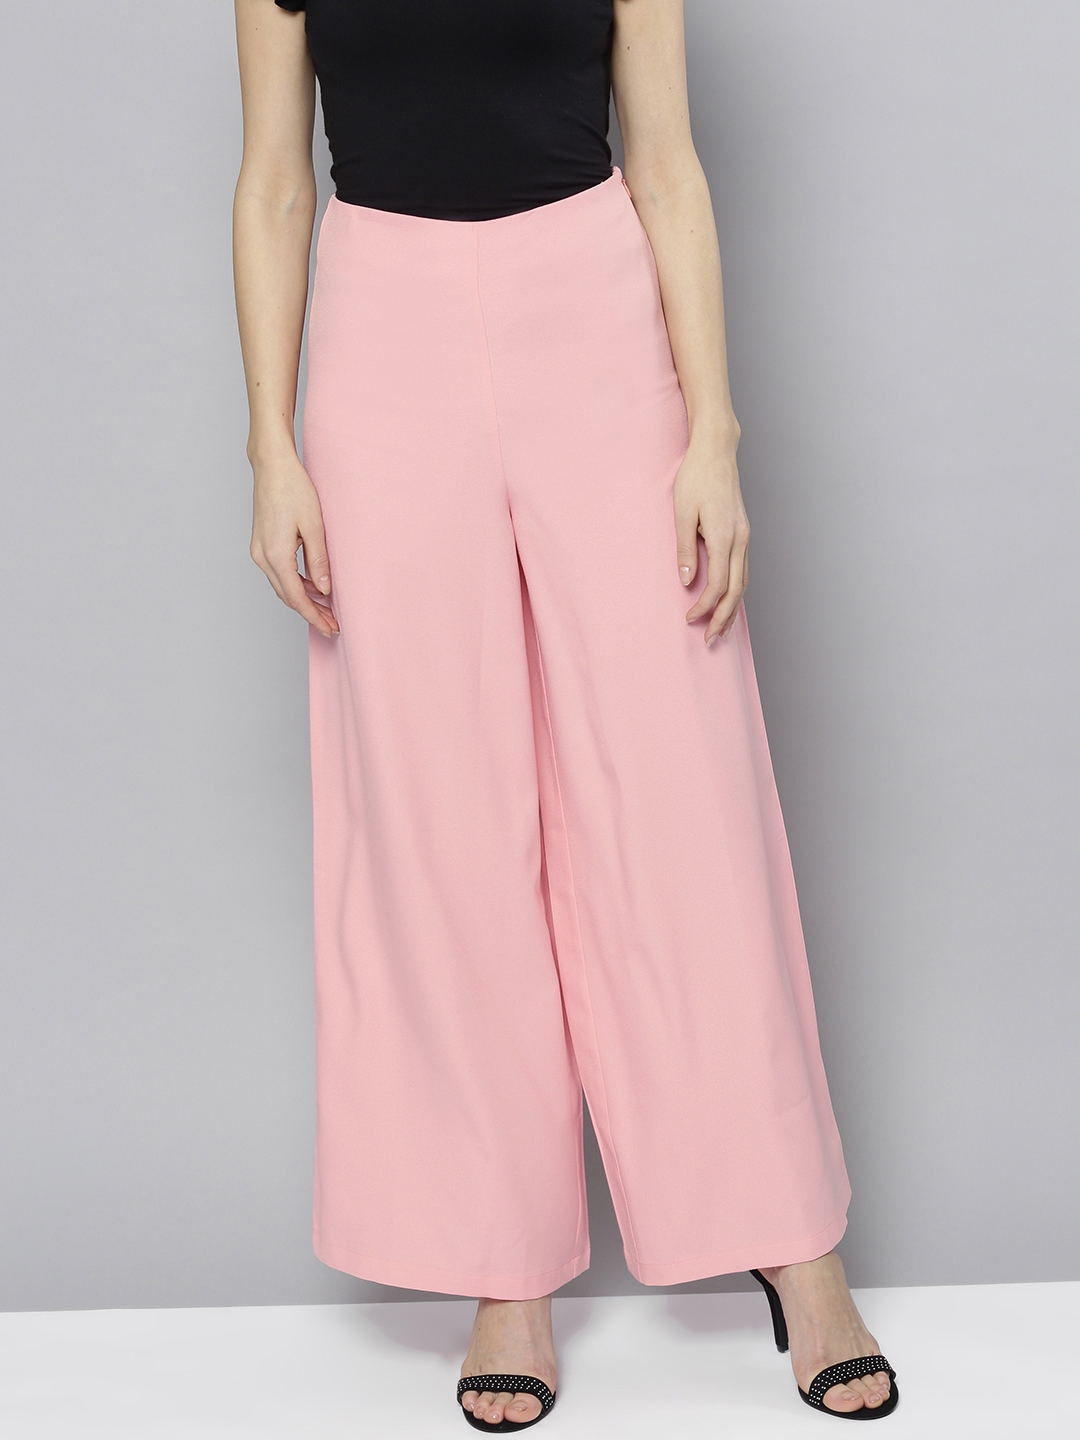 11 Best Pink trousers outfit ideas  pink trousers outfit pink trousers  trouser outfit